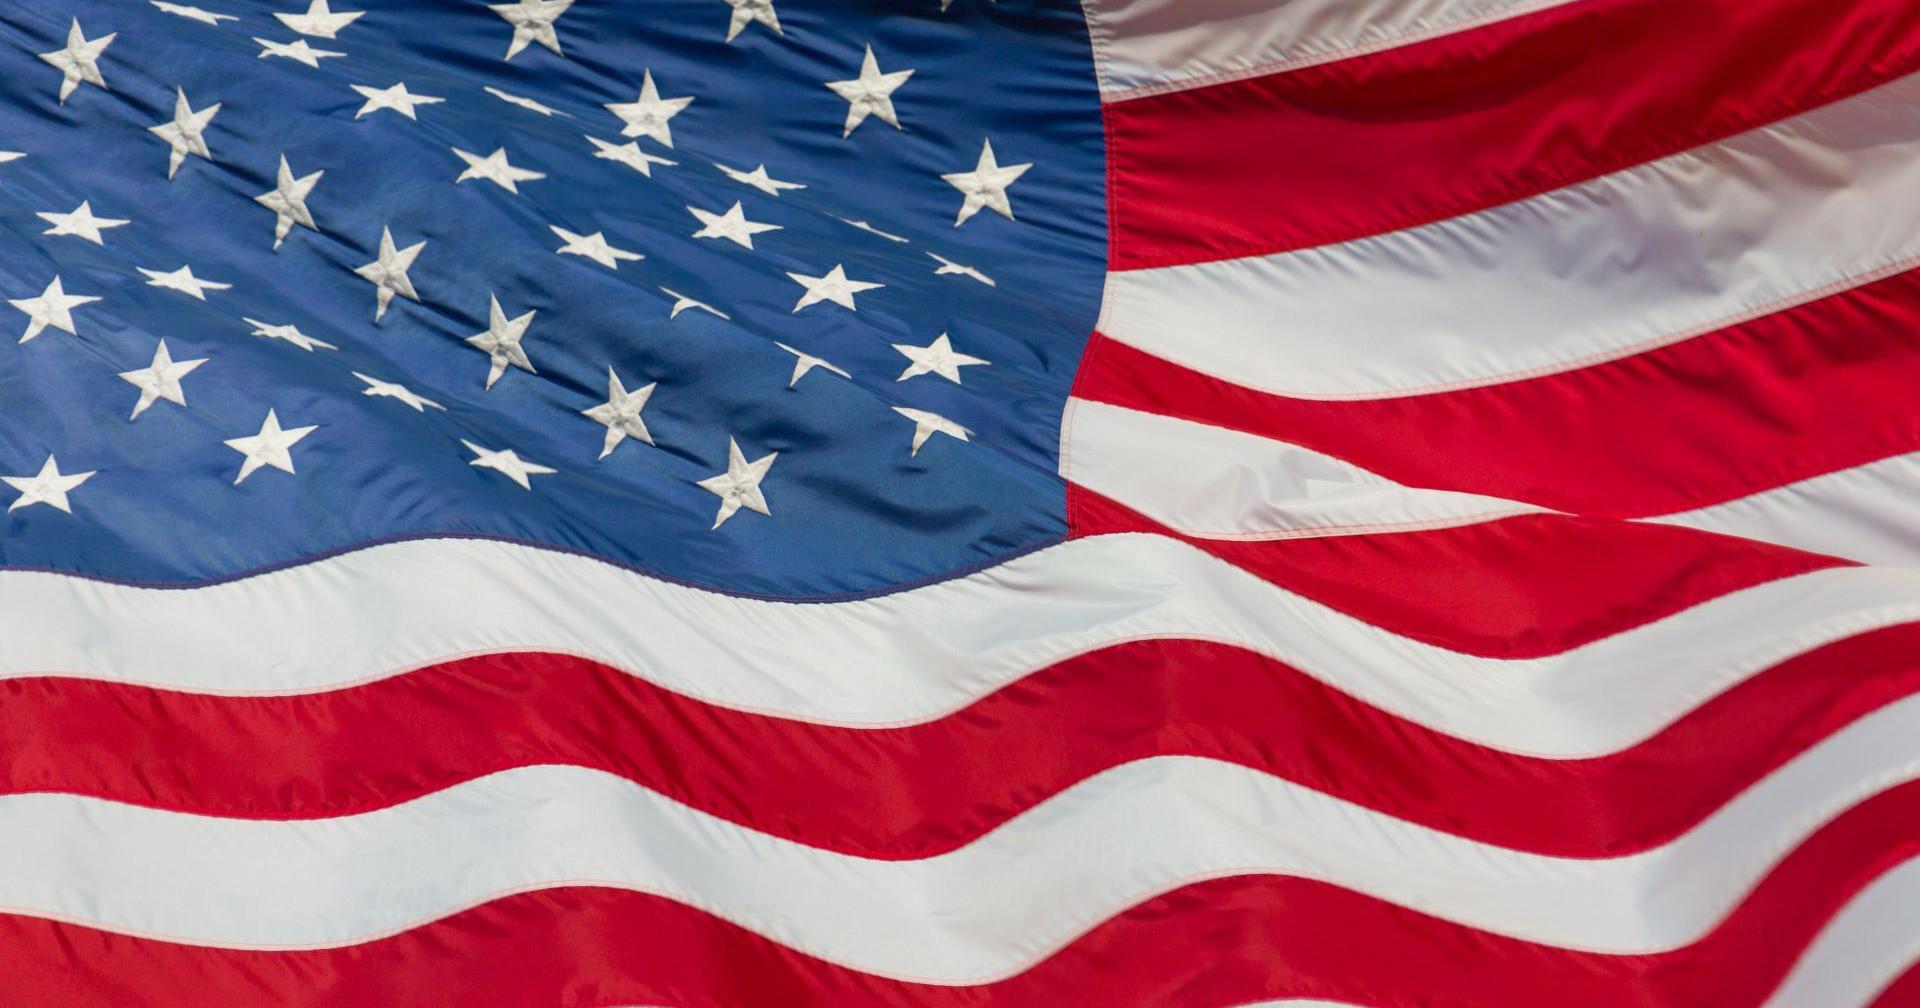 Interactive: U.S. flag history and display guidelines